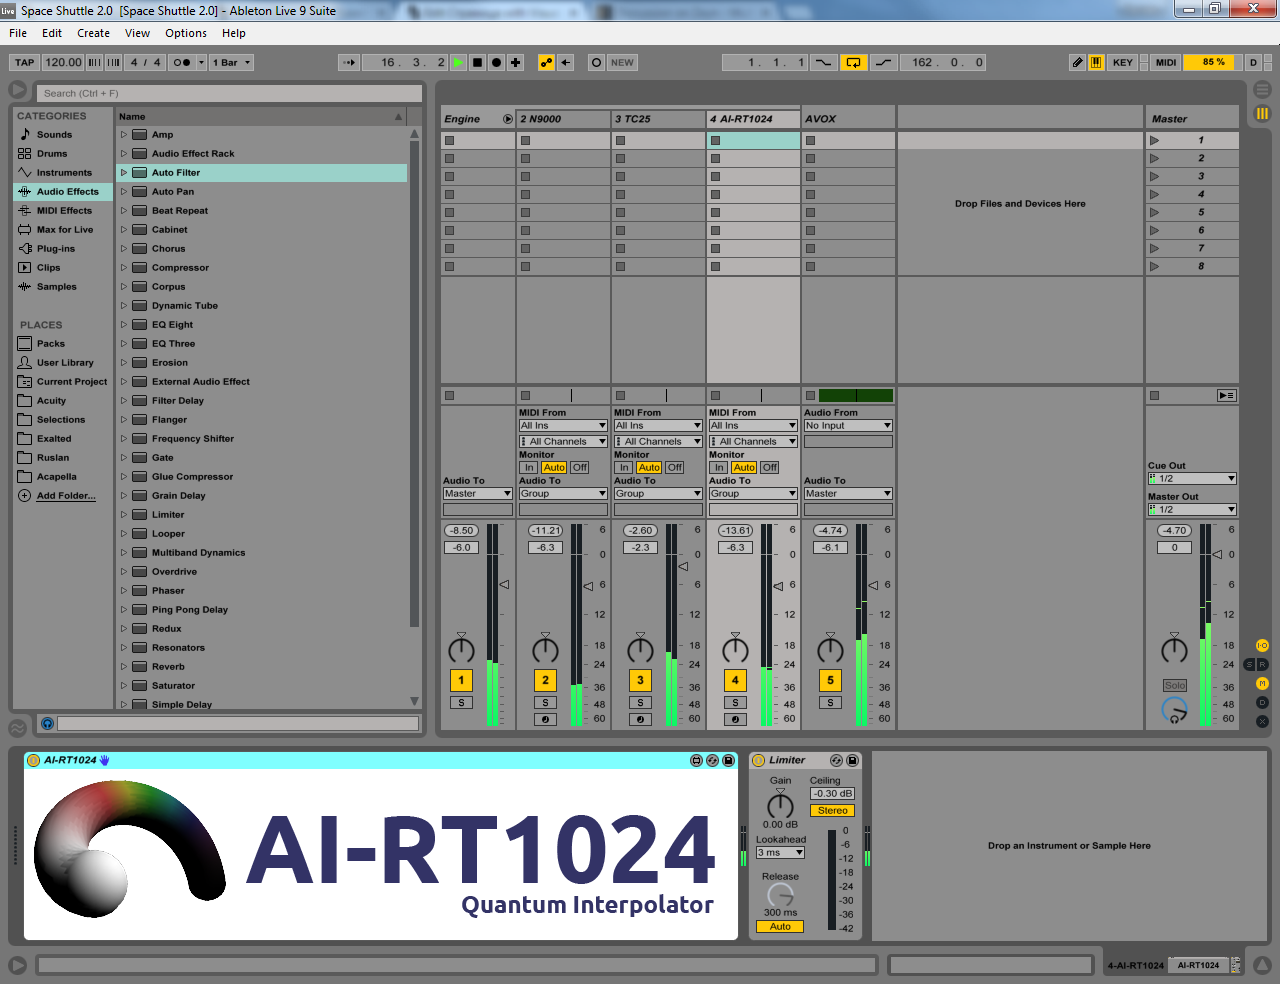 AI-RT1024 in Ableton Live 9